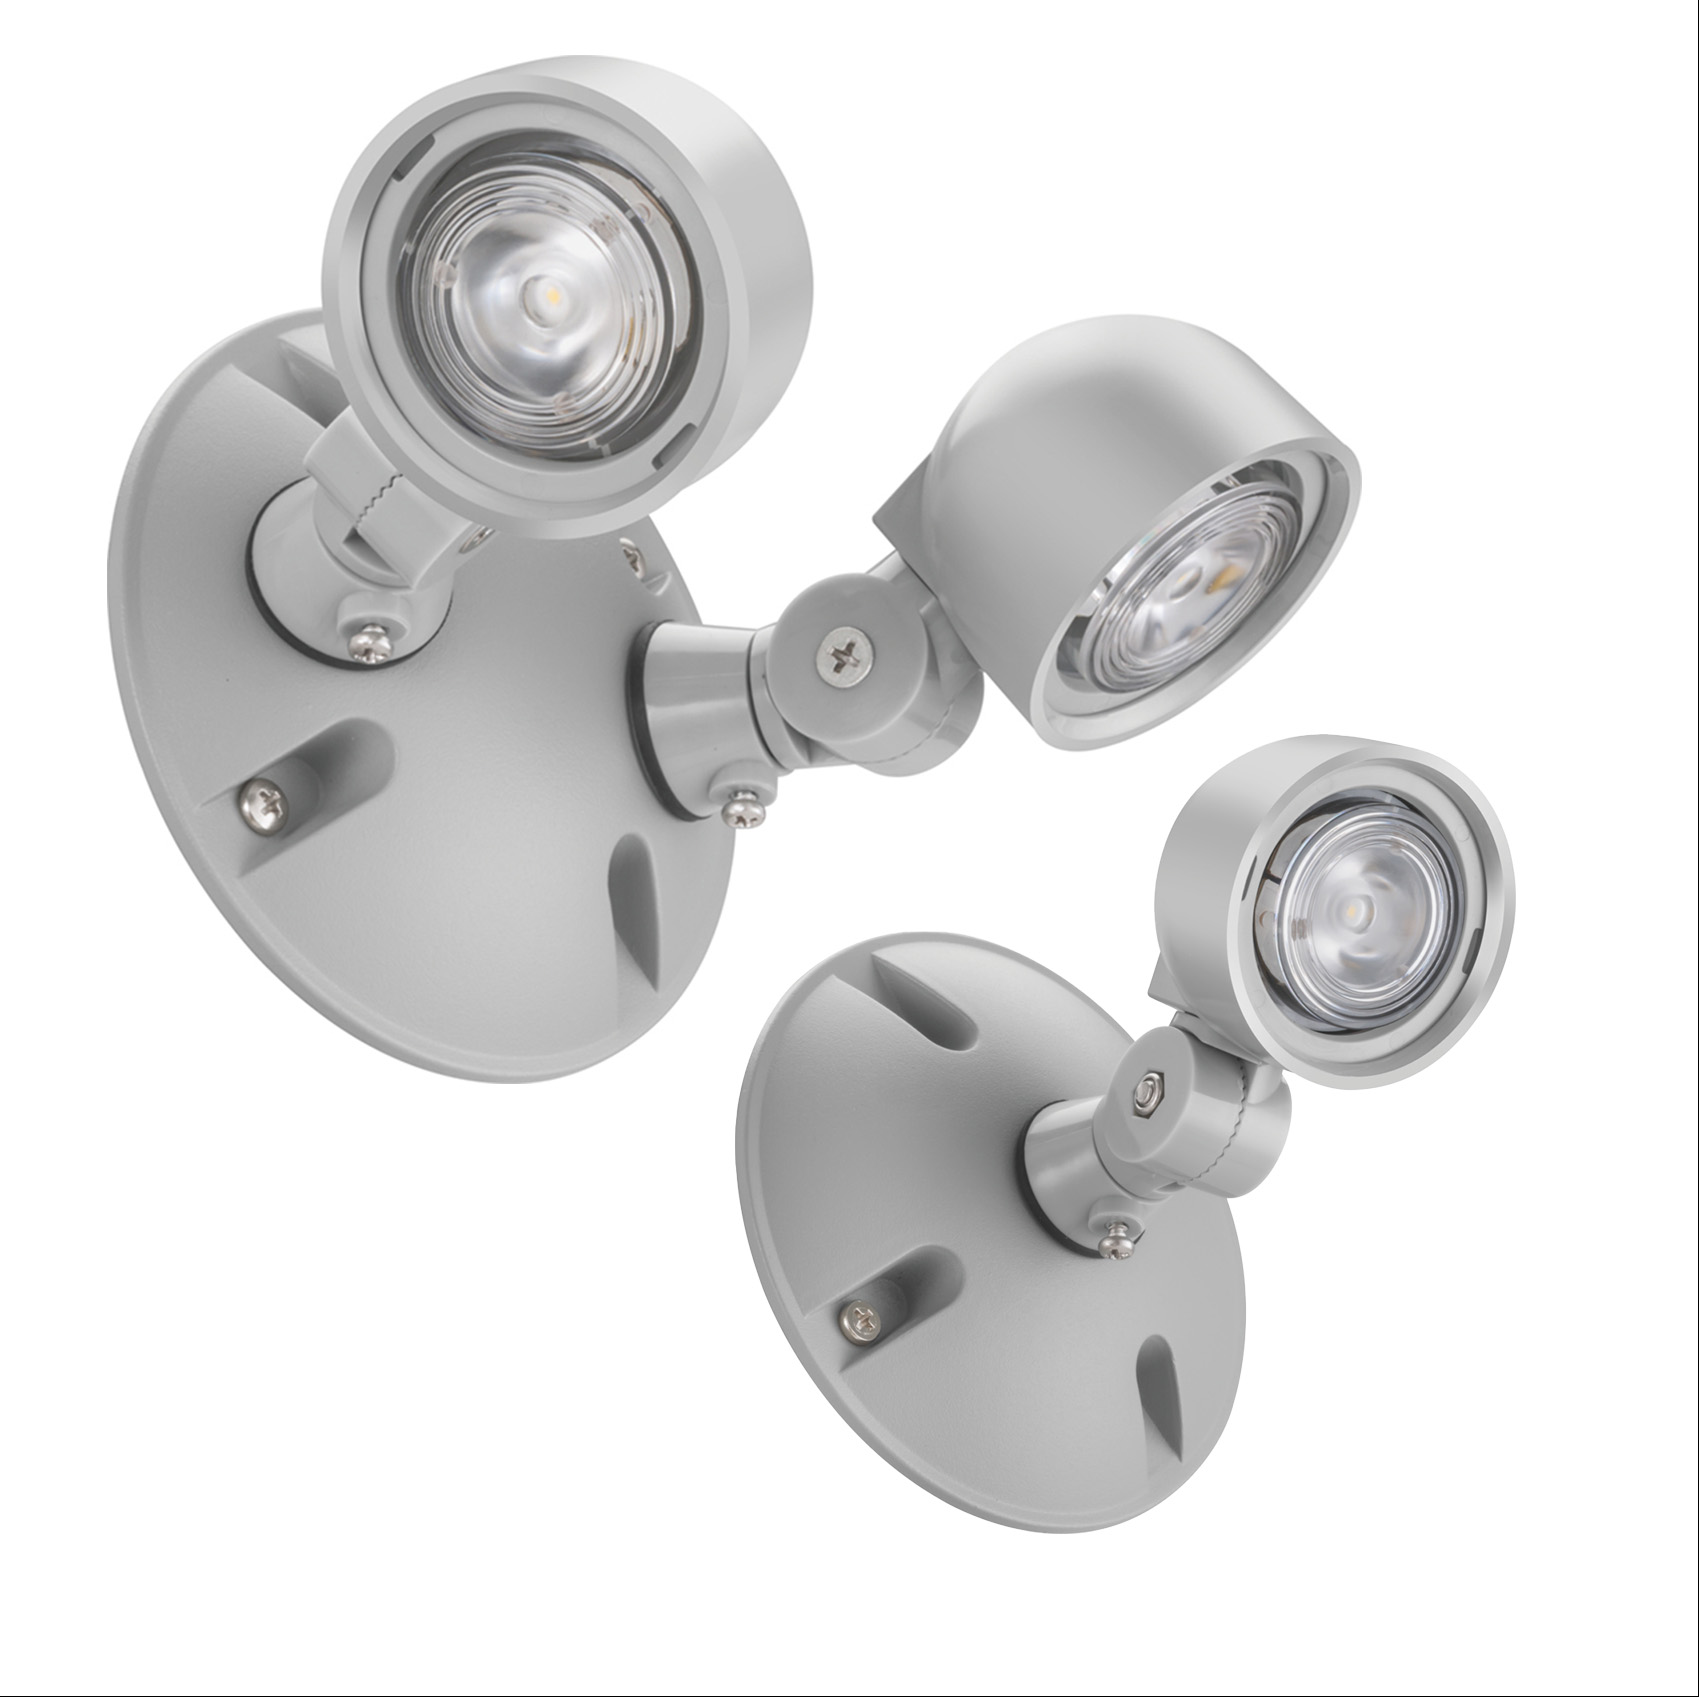 LED MINI OUTDOOR POLYCARBONATE REMOTE HEAD MRHLED